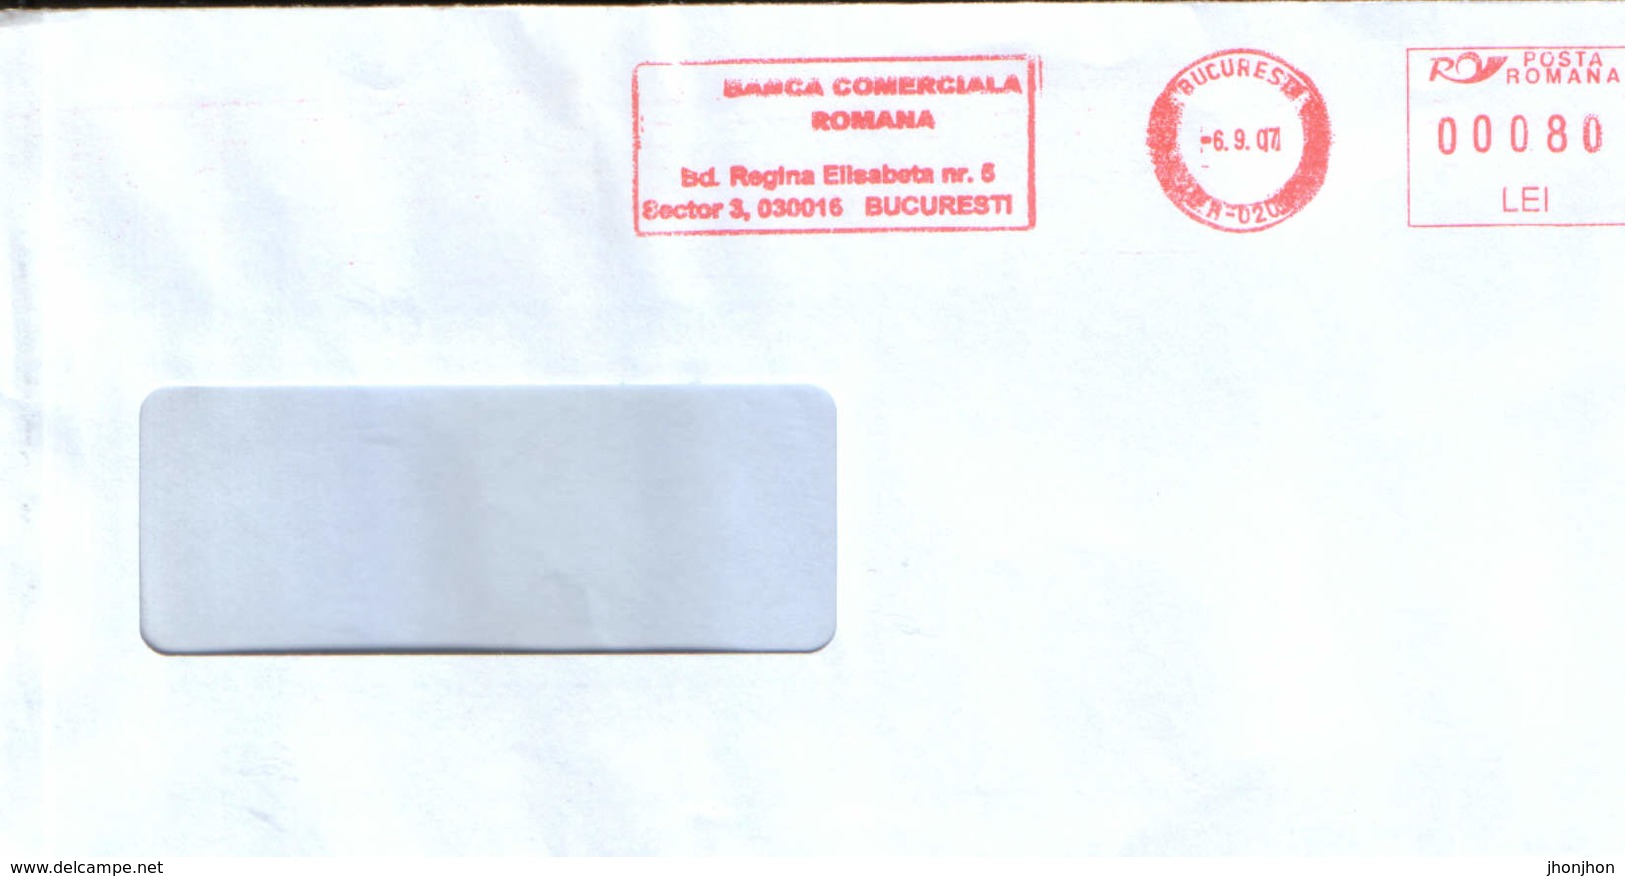 Romania - Cover (Letter) Personalized - Commercial Bank, Circulated In 2007 - Machine Footprints - Franking Machines (EMA)